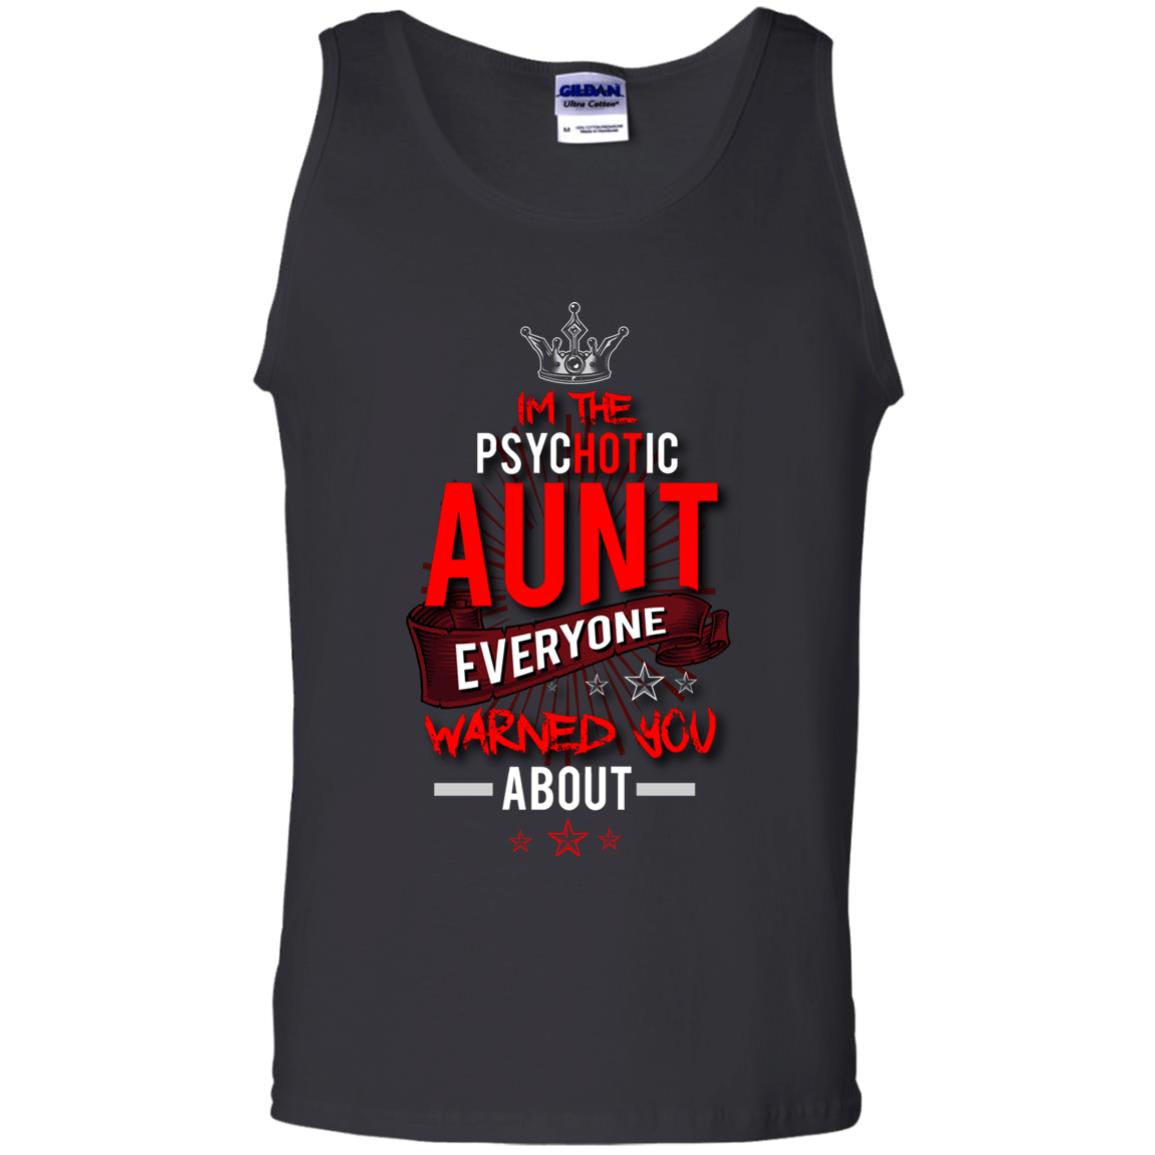 I_m The Psychotic Aunt Everyone Warned You Psychotic T-shirt